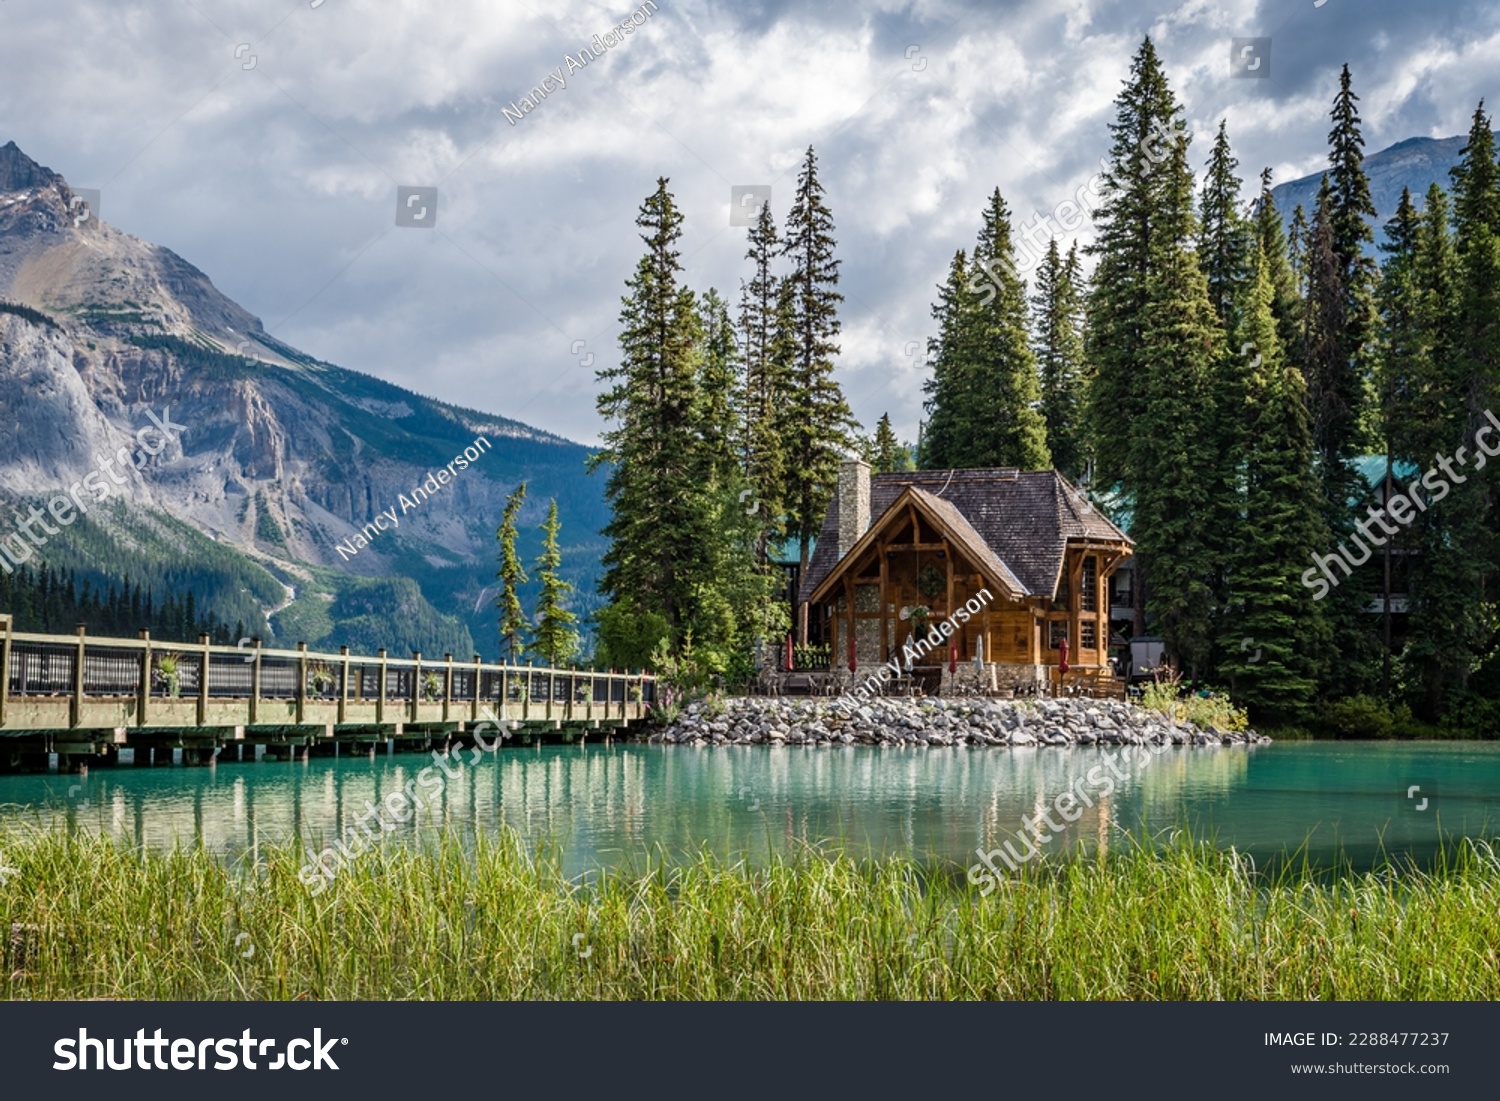 Views of the iconic Emerald Lake Lodge, at Emerald Lake in Yoho National Park, BC, a UNESCO World Heritage Site #2288477237